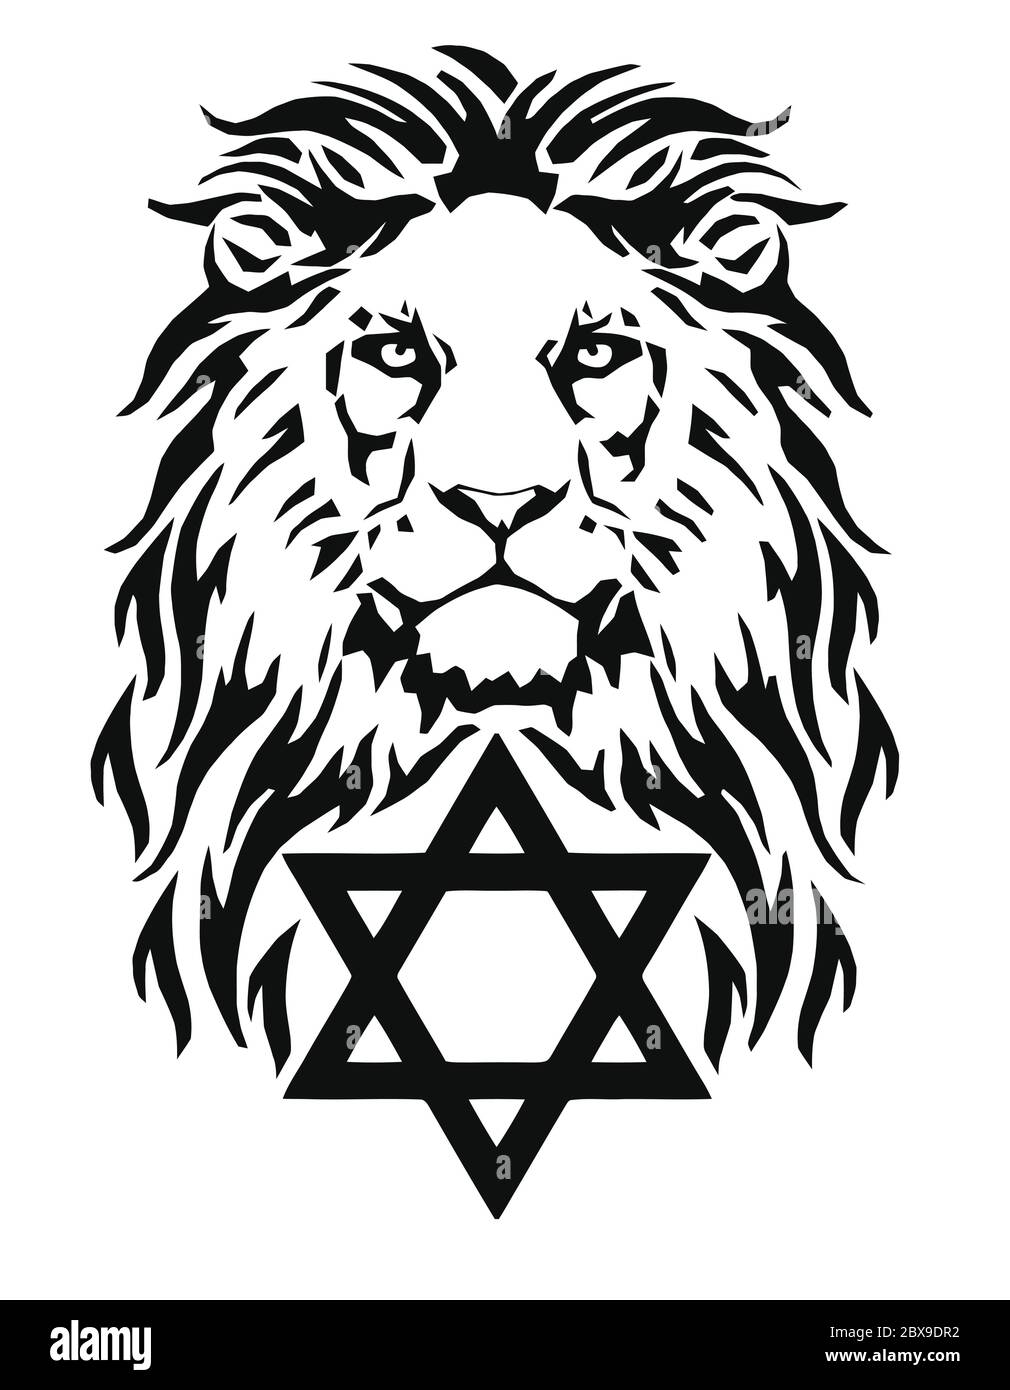 The Lion and the symbol of Judaism - star of David, Megan David,  drawing for tattoo, on a white background, vector Stock Vector